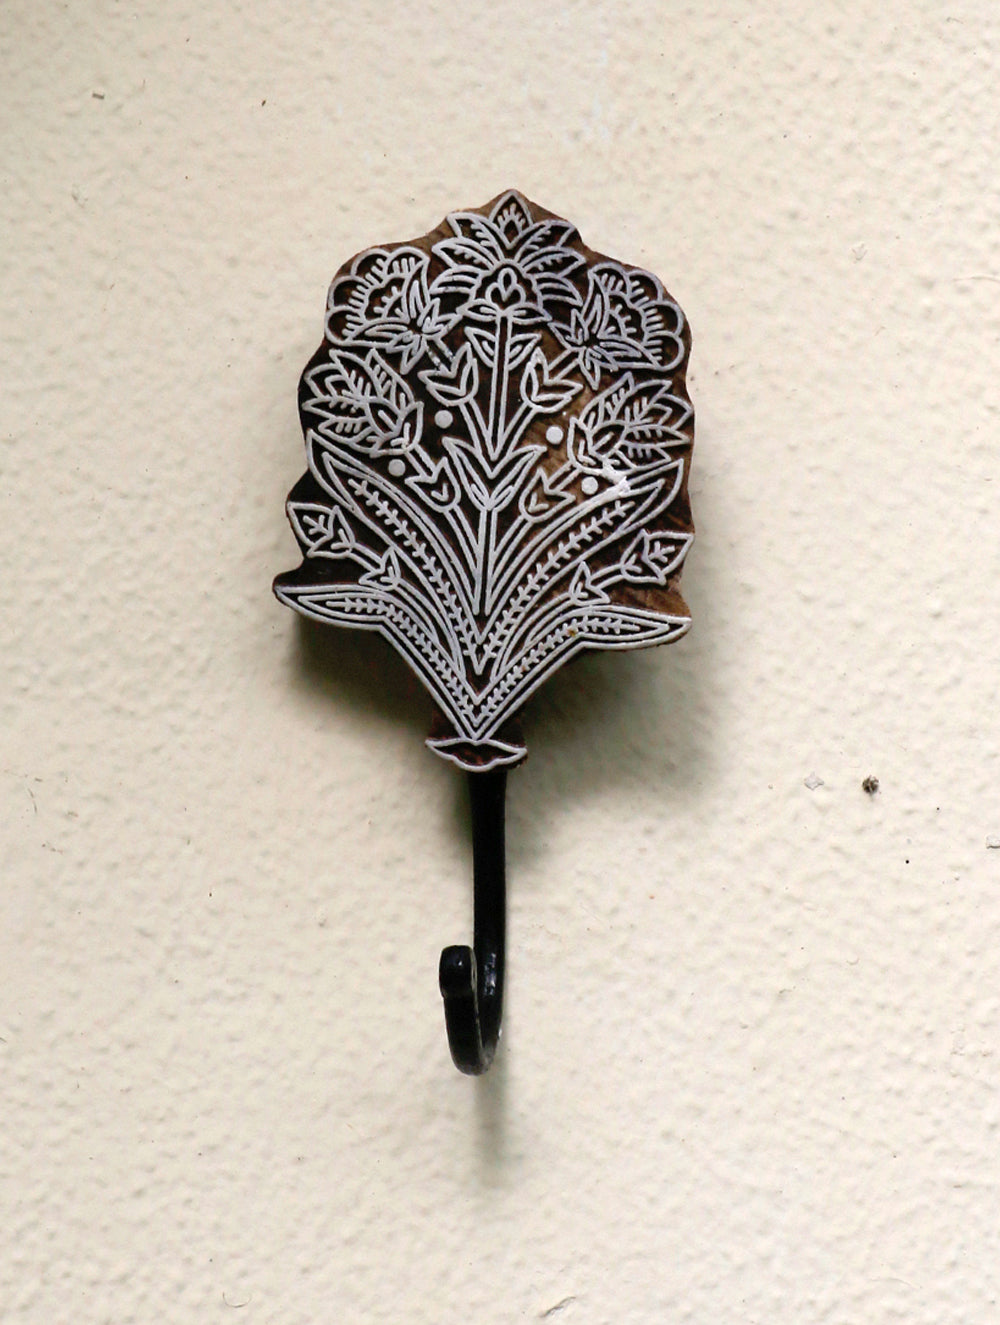 Load image into Gallery viewer, Wooden Engraved Wall Hook - Tree Motif - The India Craft House 